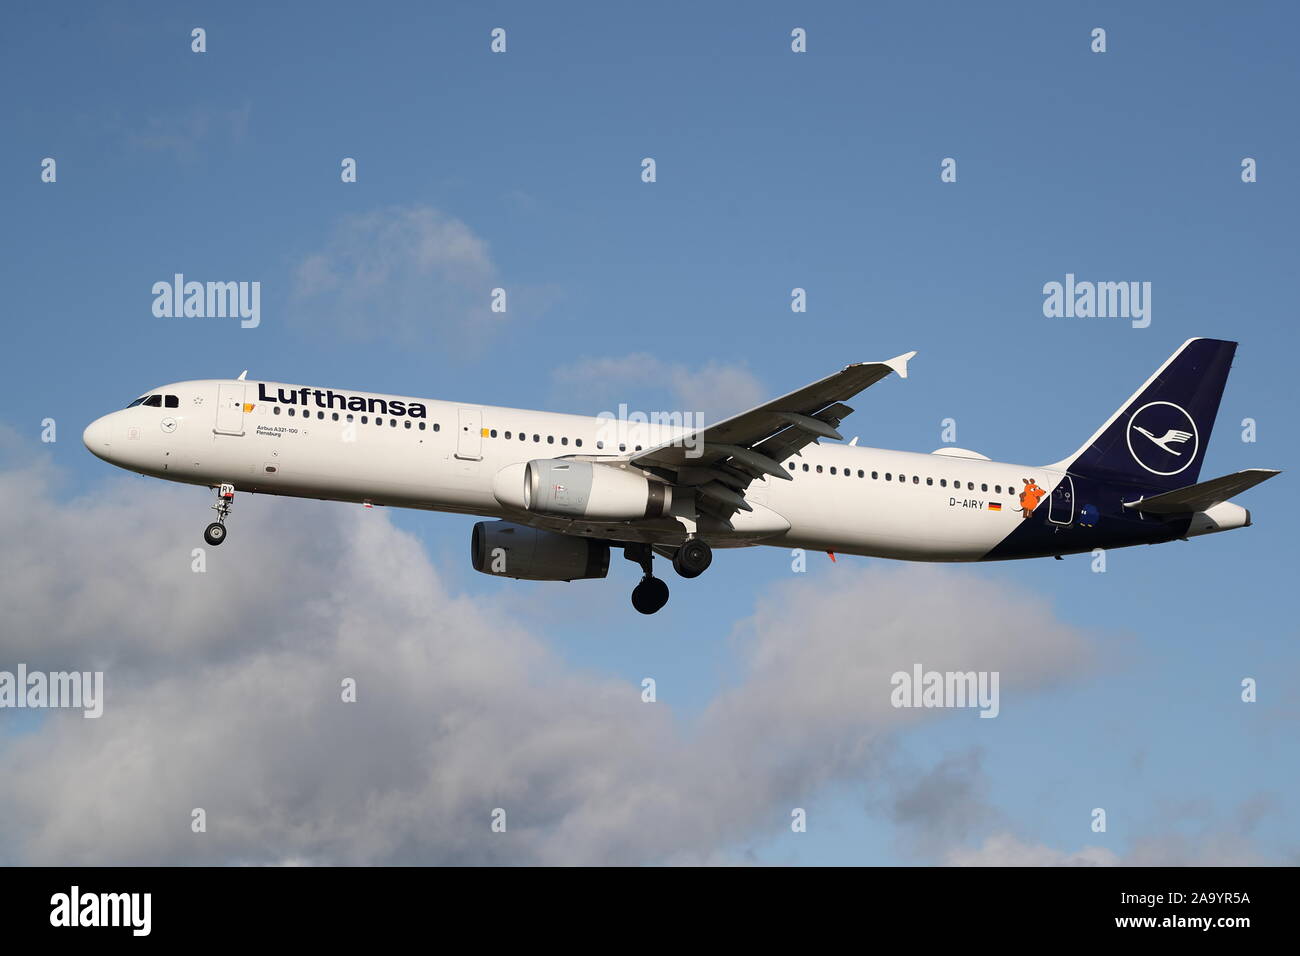 Lufthansa Airbus A321 D-AIRY in special livery sporting 'Die Maus', a children's cartoon character, landing at London Heathrow Airport, UK Stock Photo